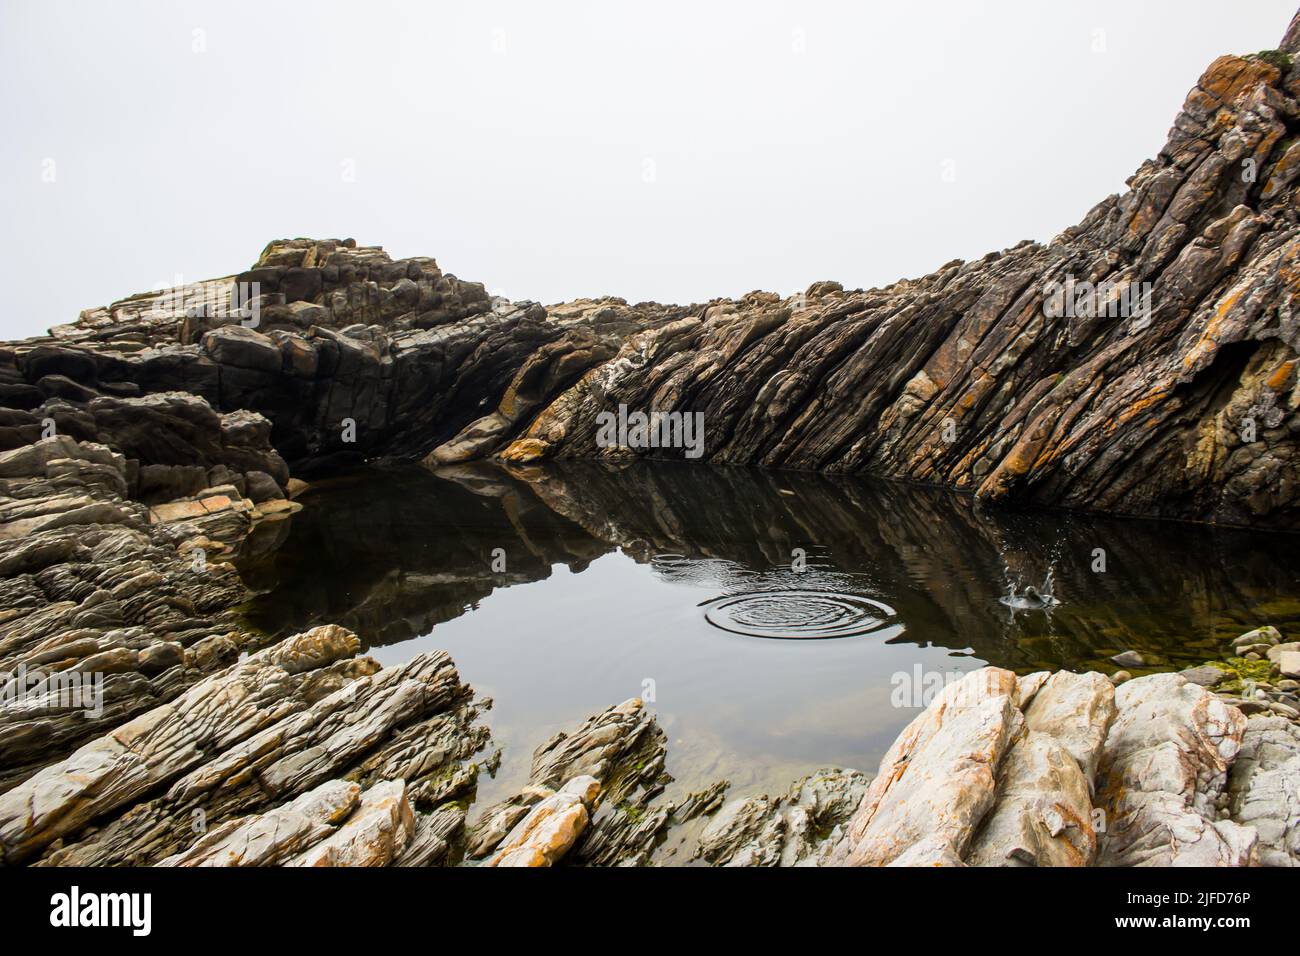 Skipping rocks on a sheltered, calm rock pool among the tilted, jagged rocks of the Tsitsikamma Coastline, South Africa. Stock Photo